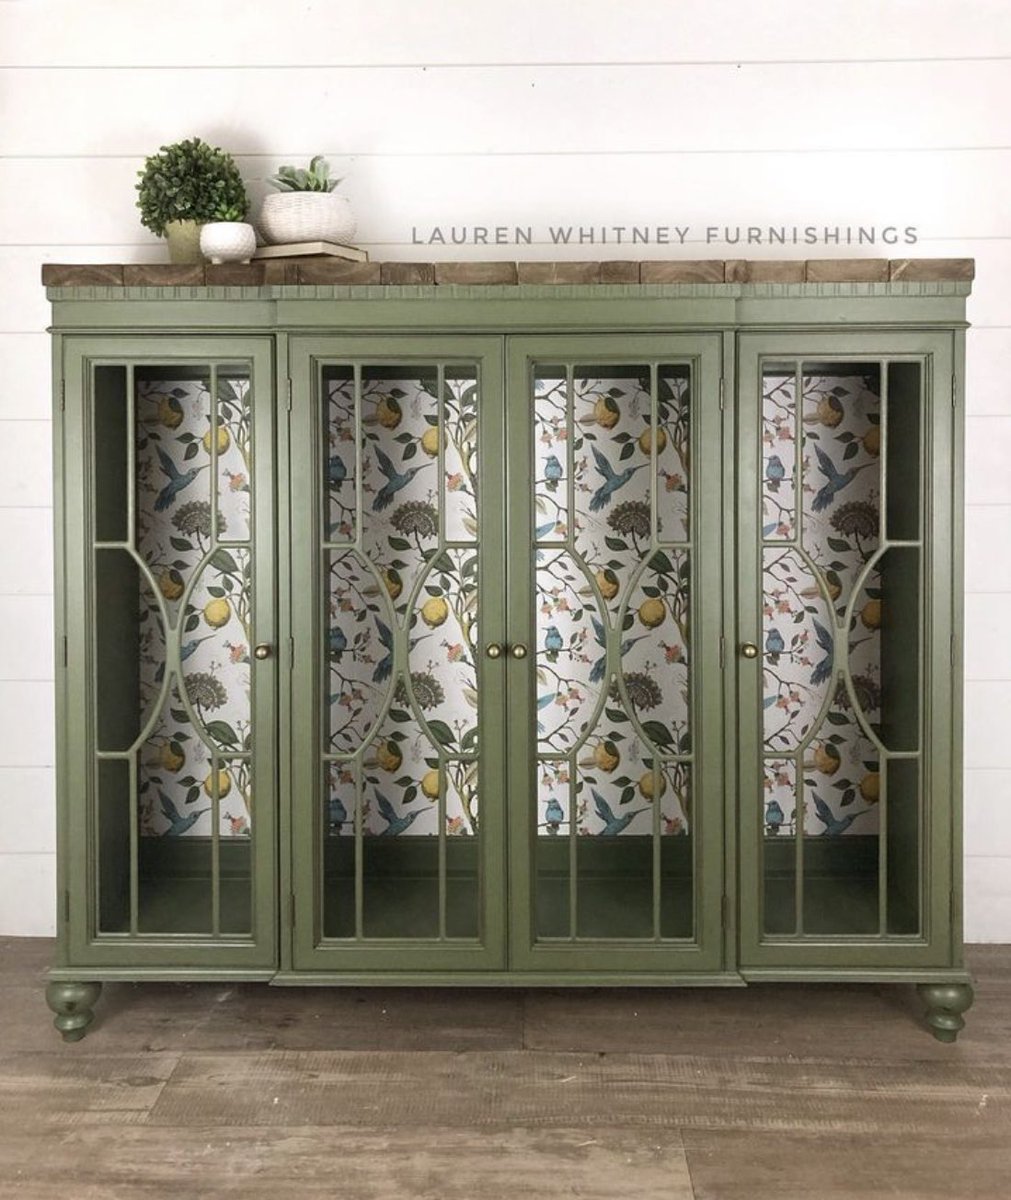 Congratulations to our sister, Lauren Whitney for winning 1st place in the #melangeproject! 
So exciting! 🎉🎉

#march #spring #fresh #hutch #furniture #furnituredesign #furnituremakeover #melange #melangepaints #laurenwhitneyfurnishings